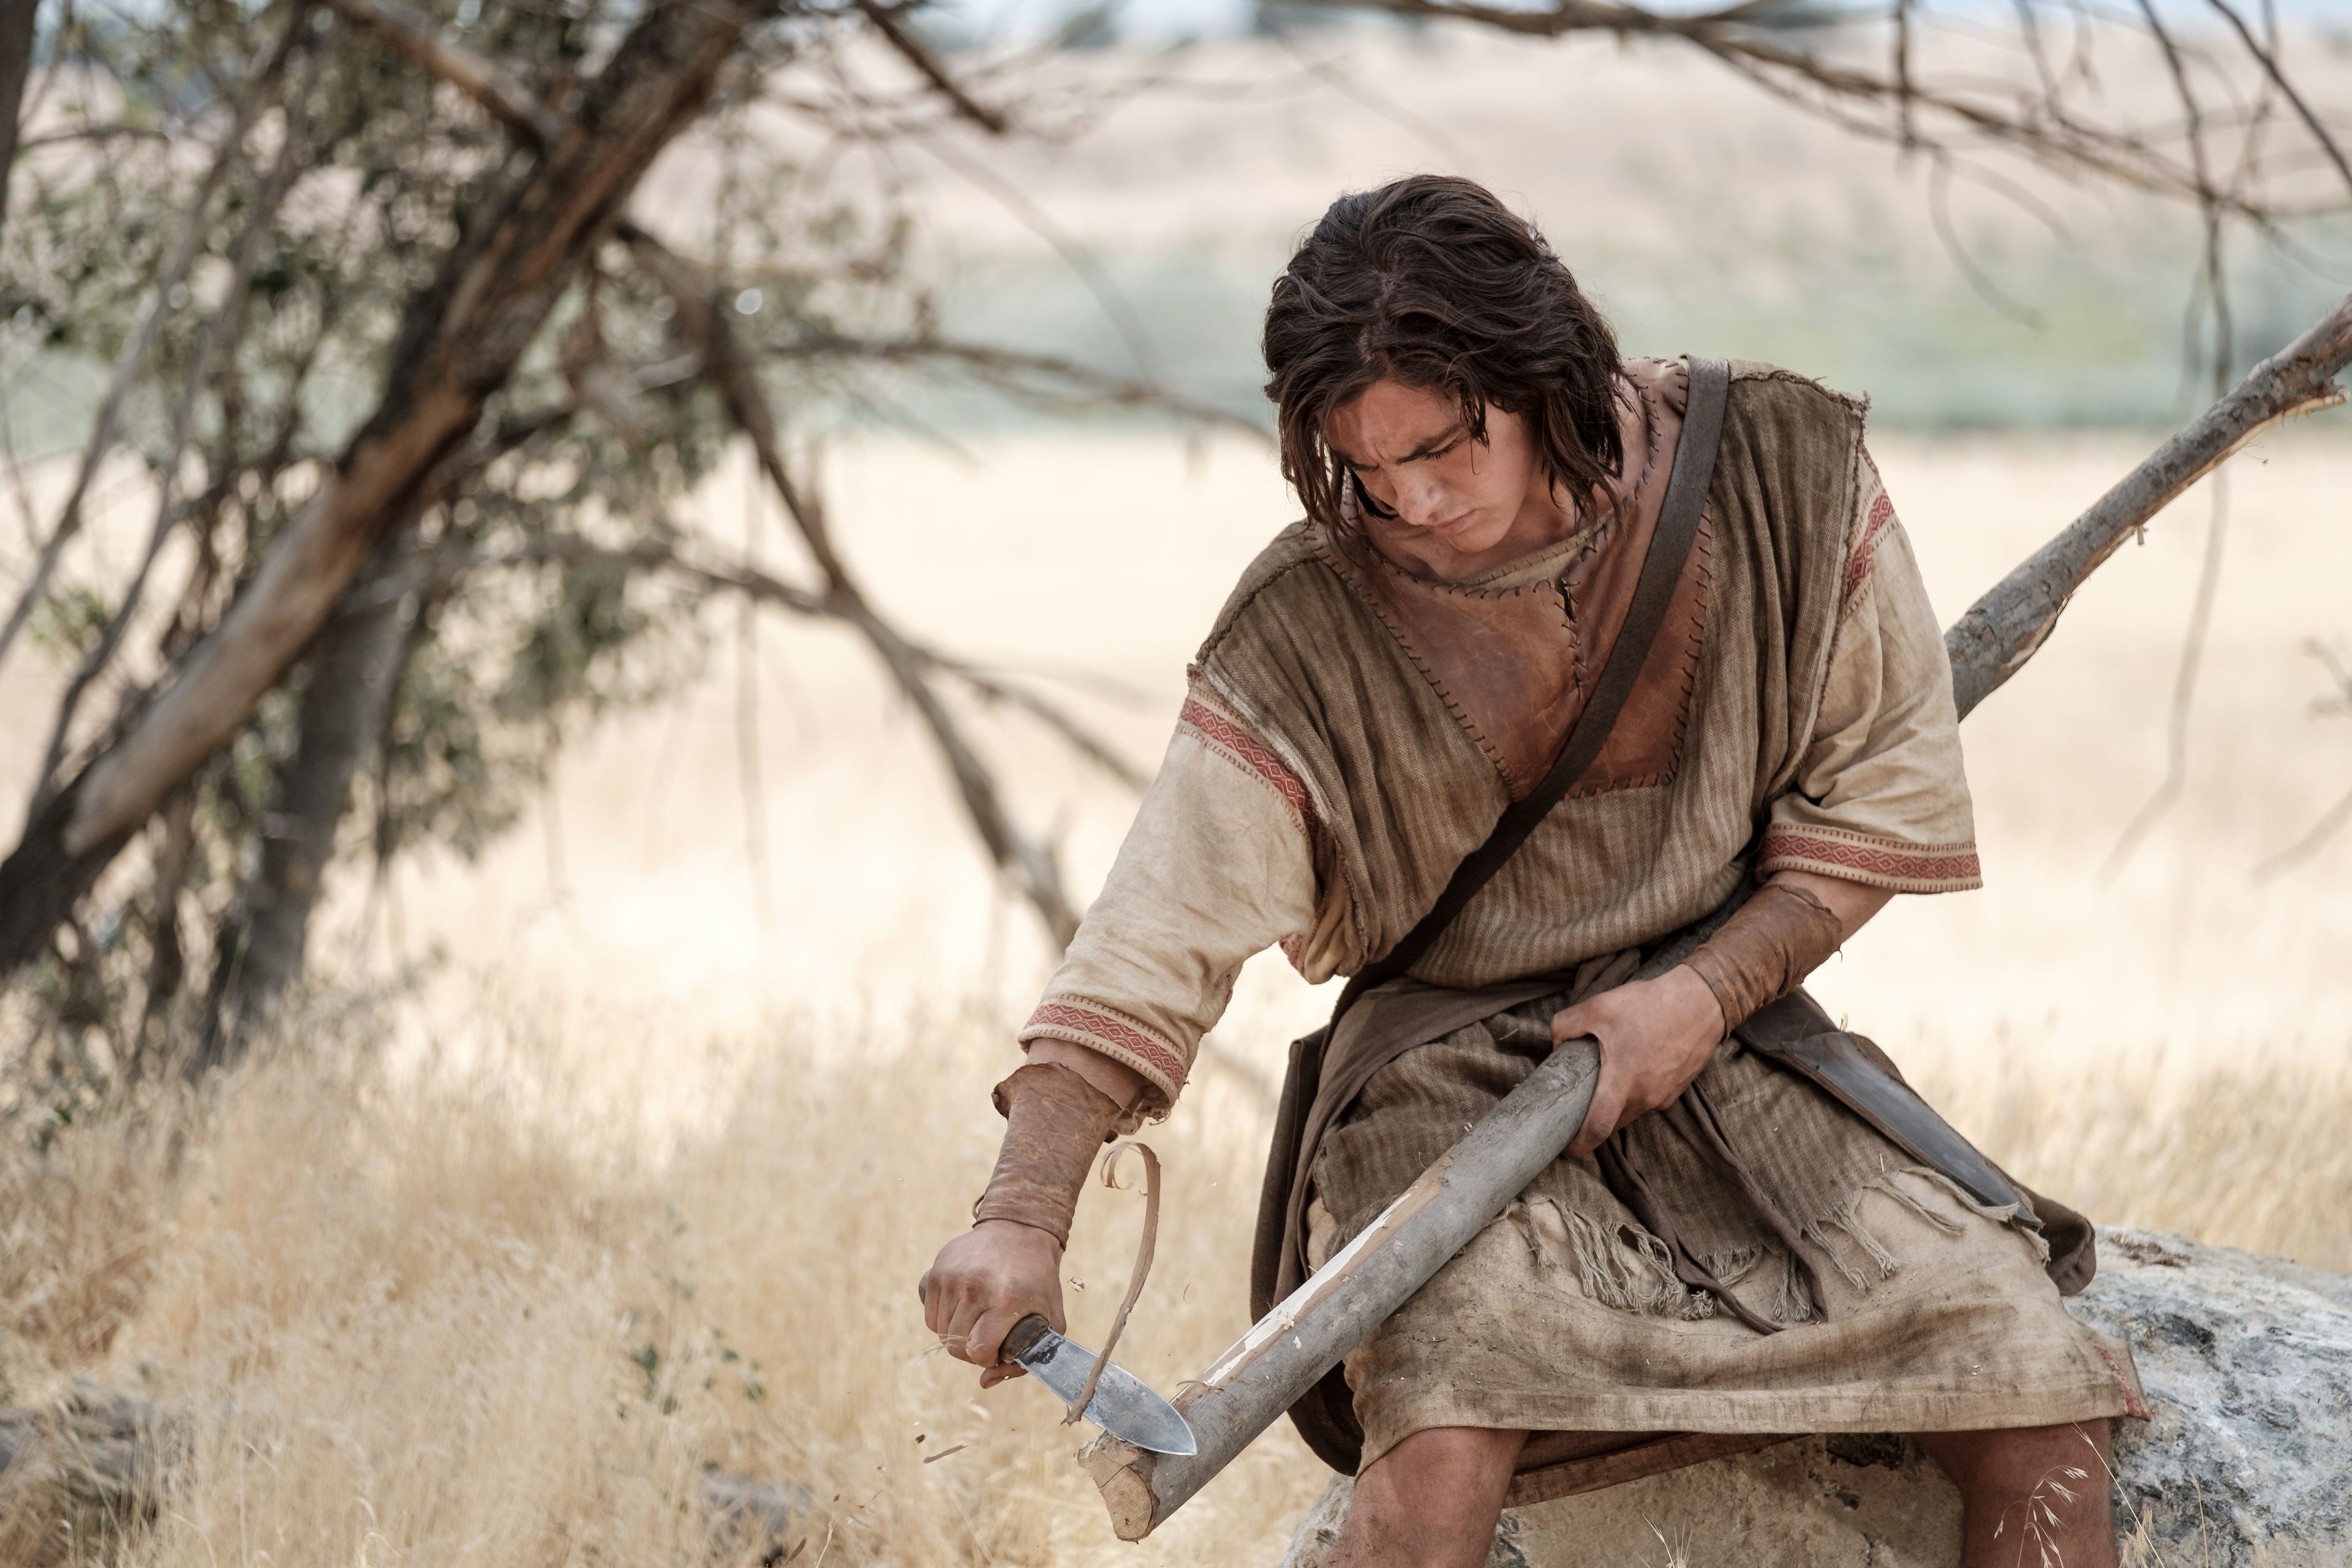 Nephi crafts a bow in the wilderness.